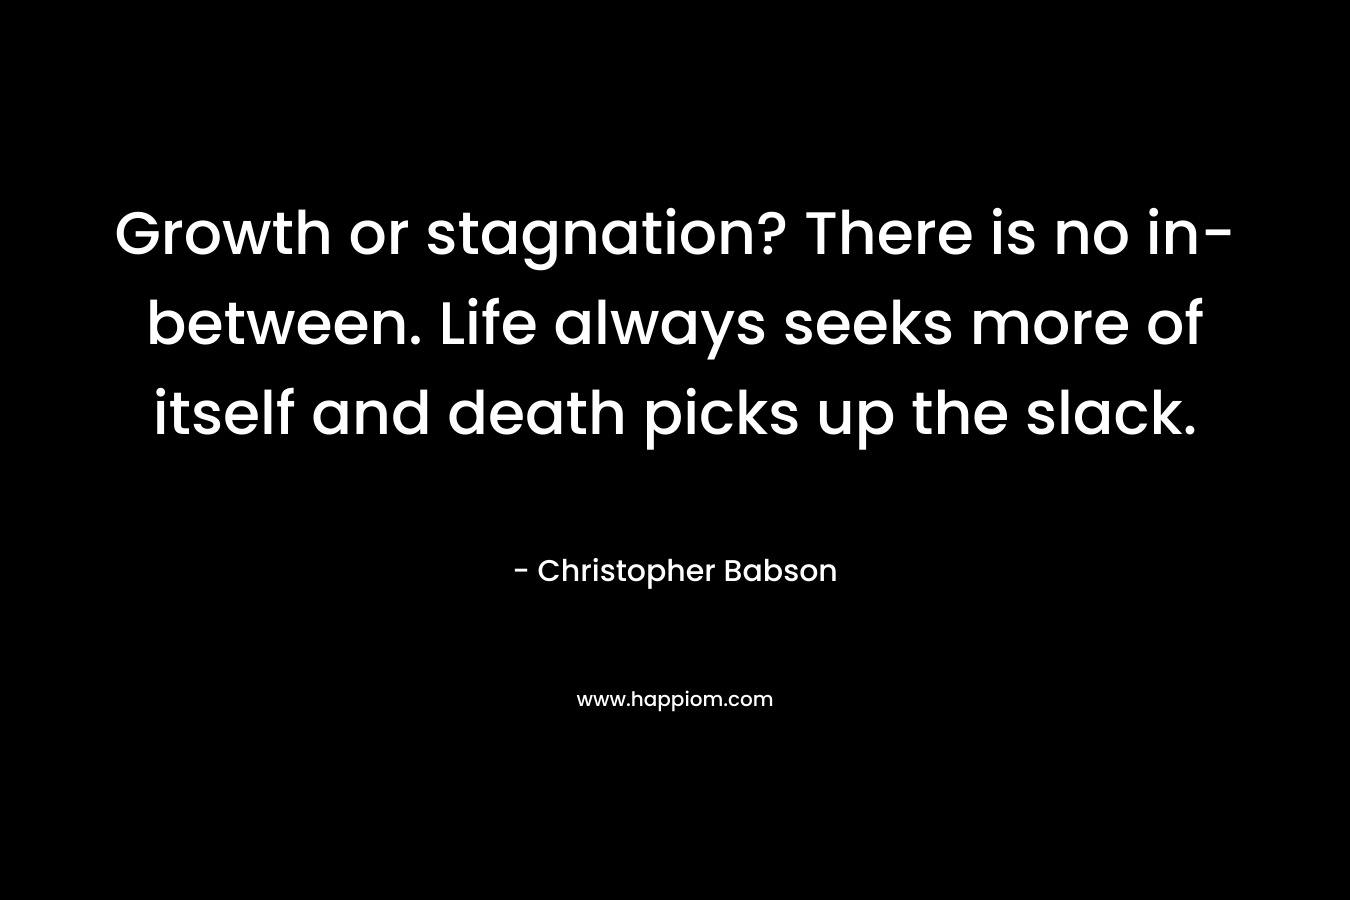 Growth or stagnation? There is no in-between. Life always seeks more of itself and death picks up the slack.